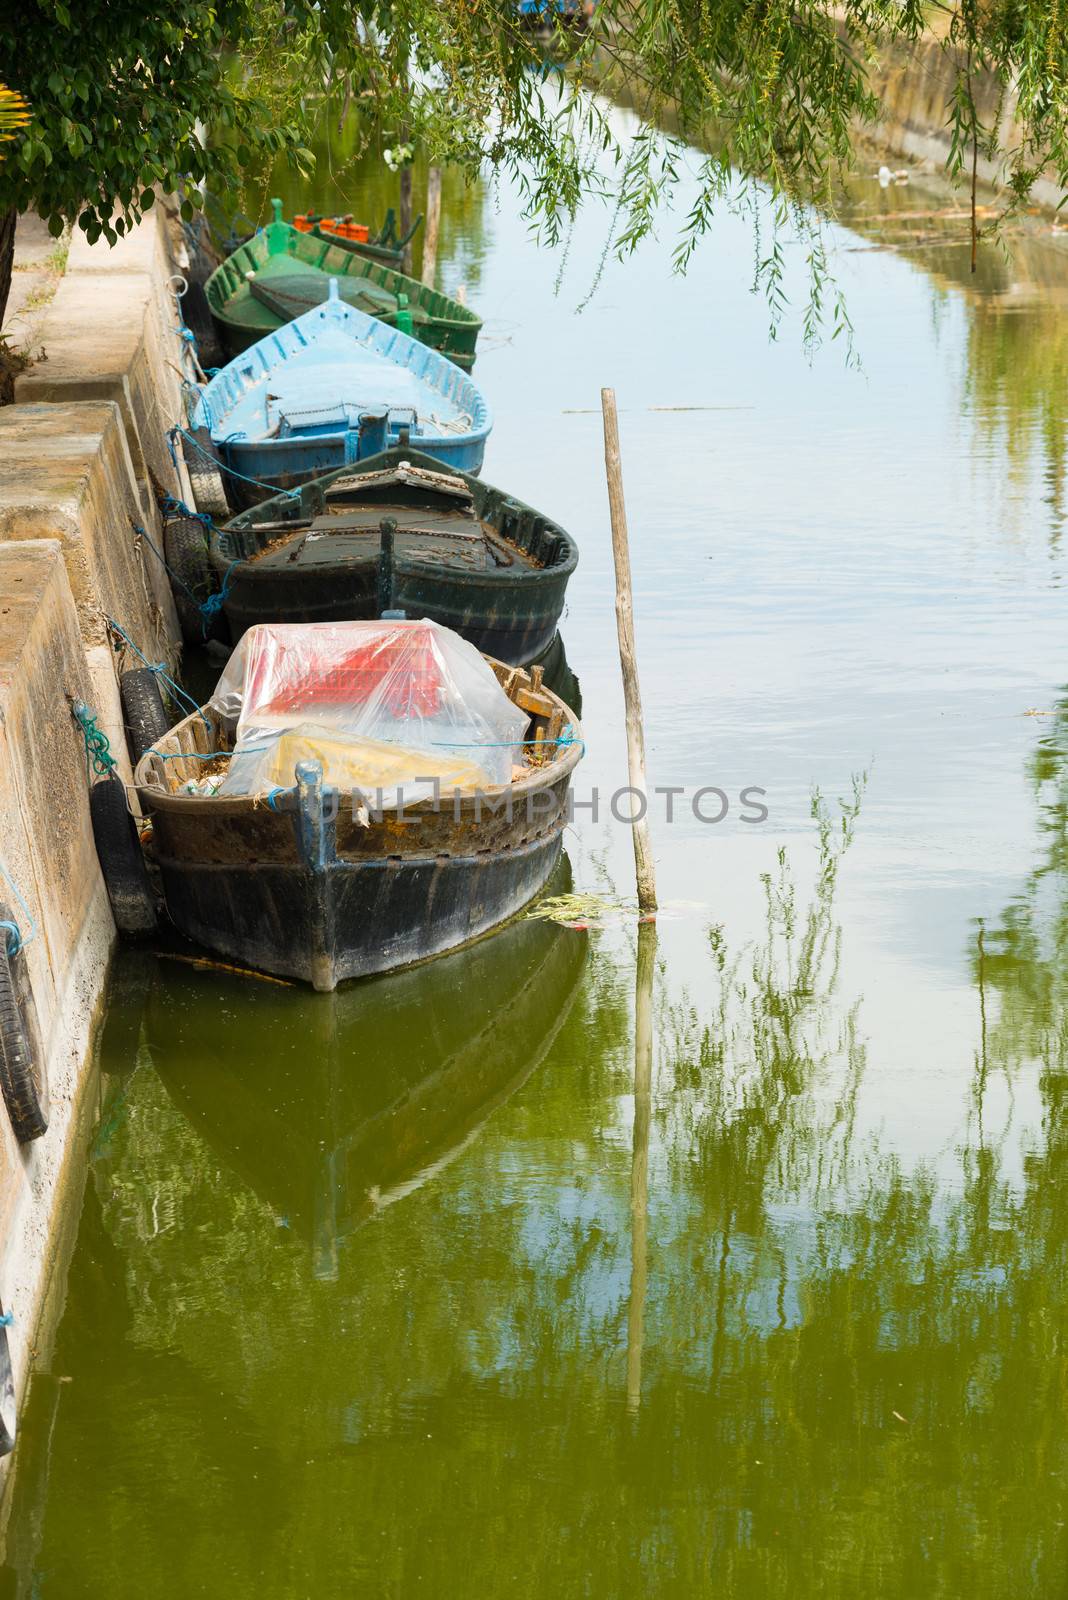 Traditional fishing boats as seen all over La Albufera natural park, Valencia, Spain